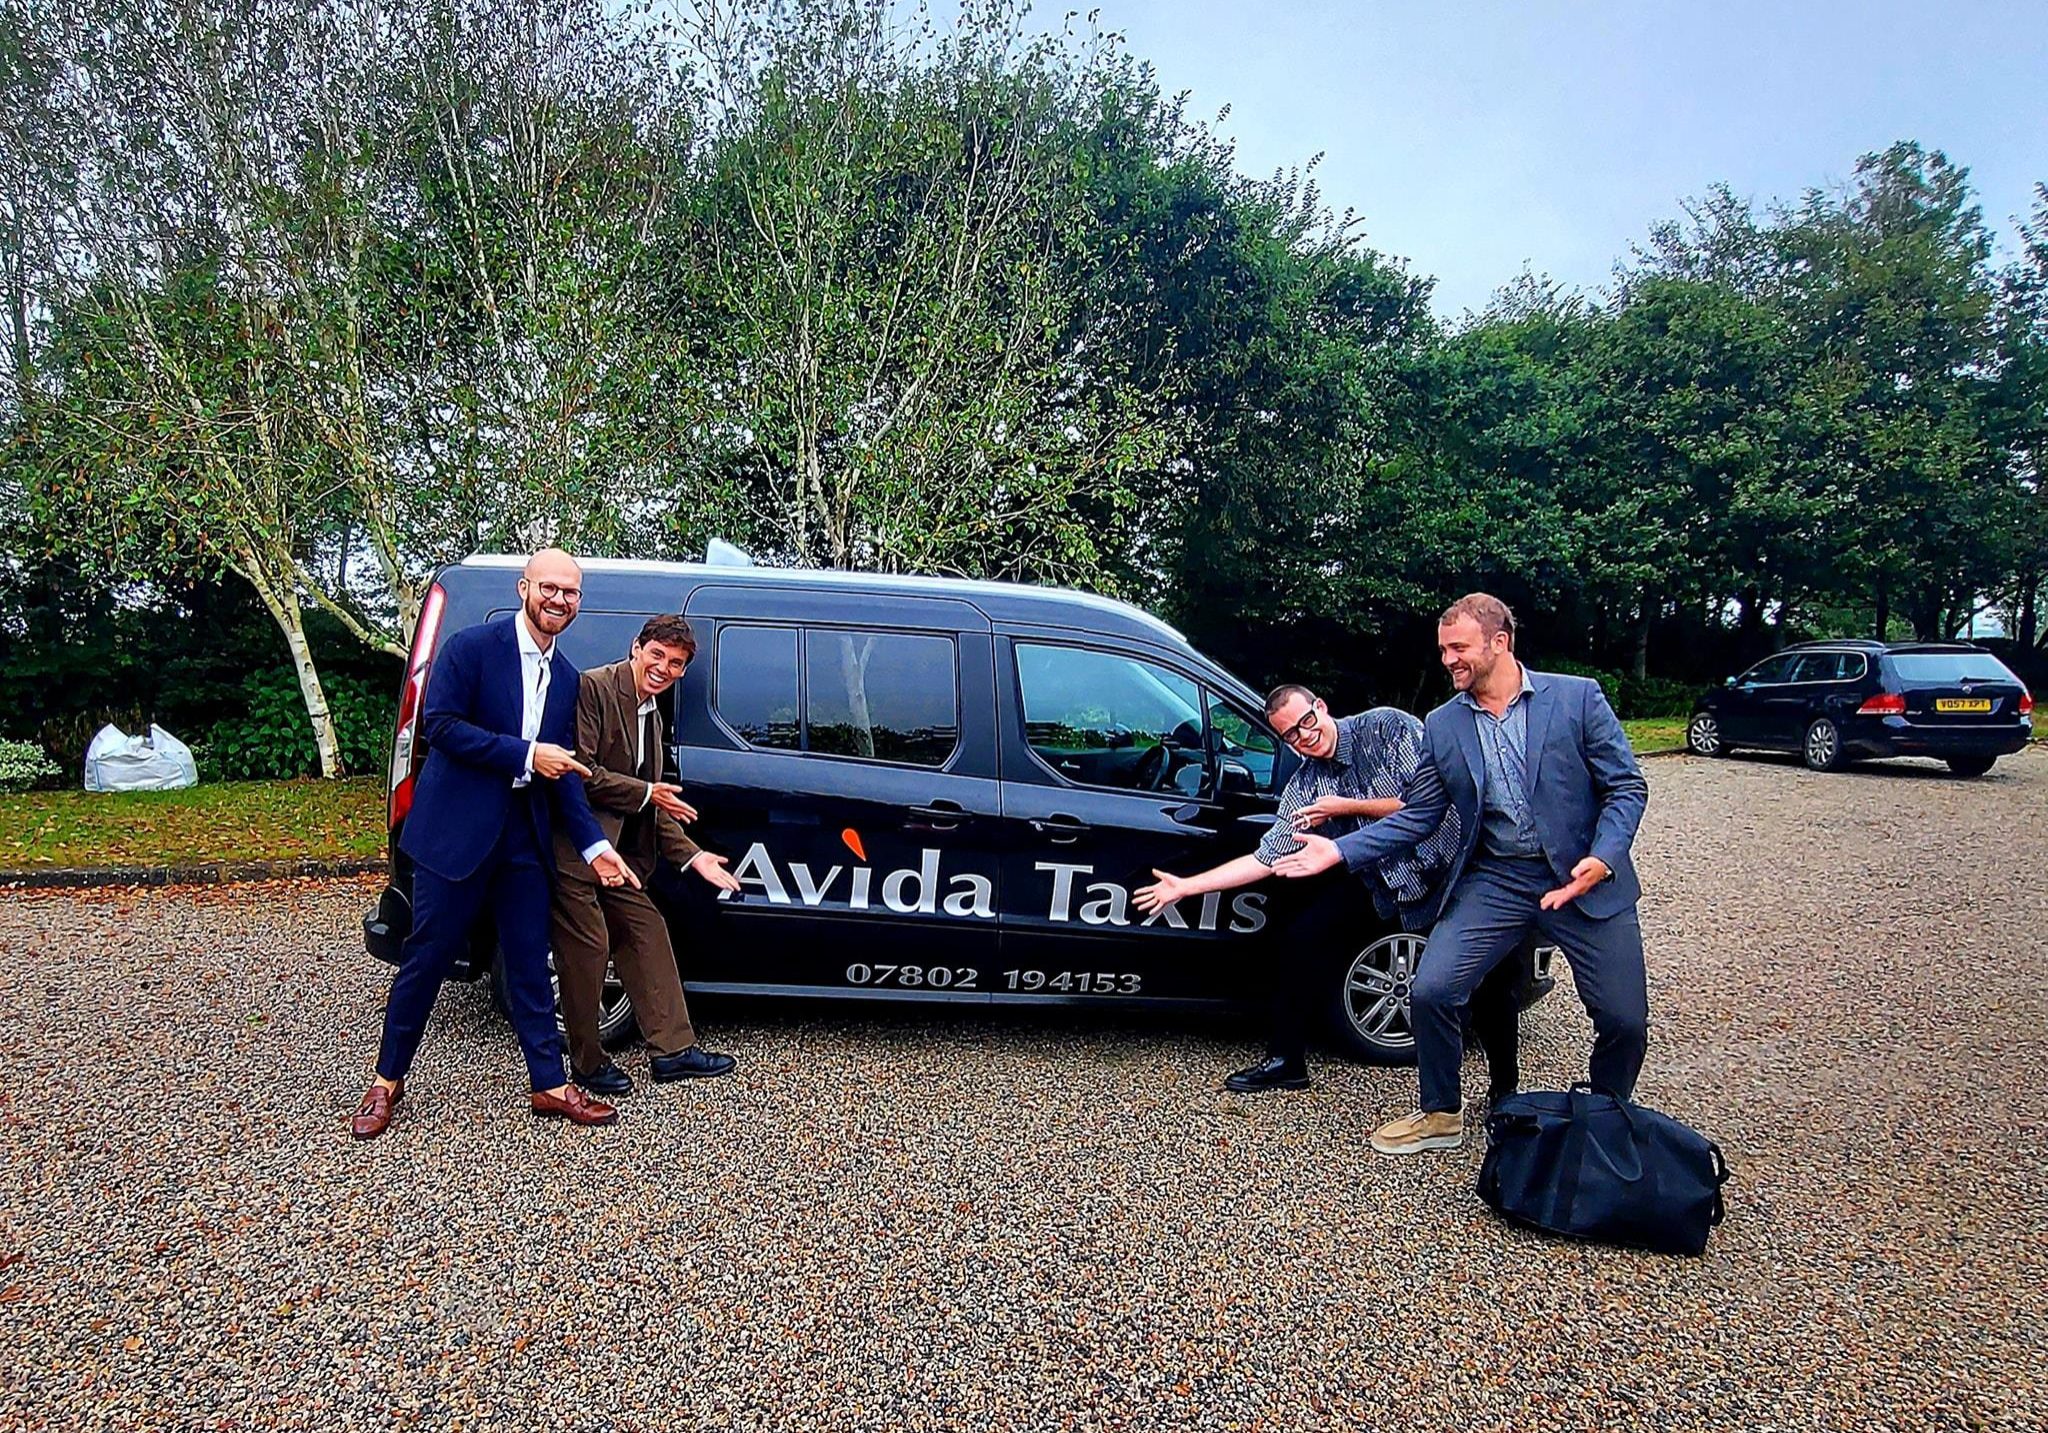 Avida taxi with its passengers